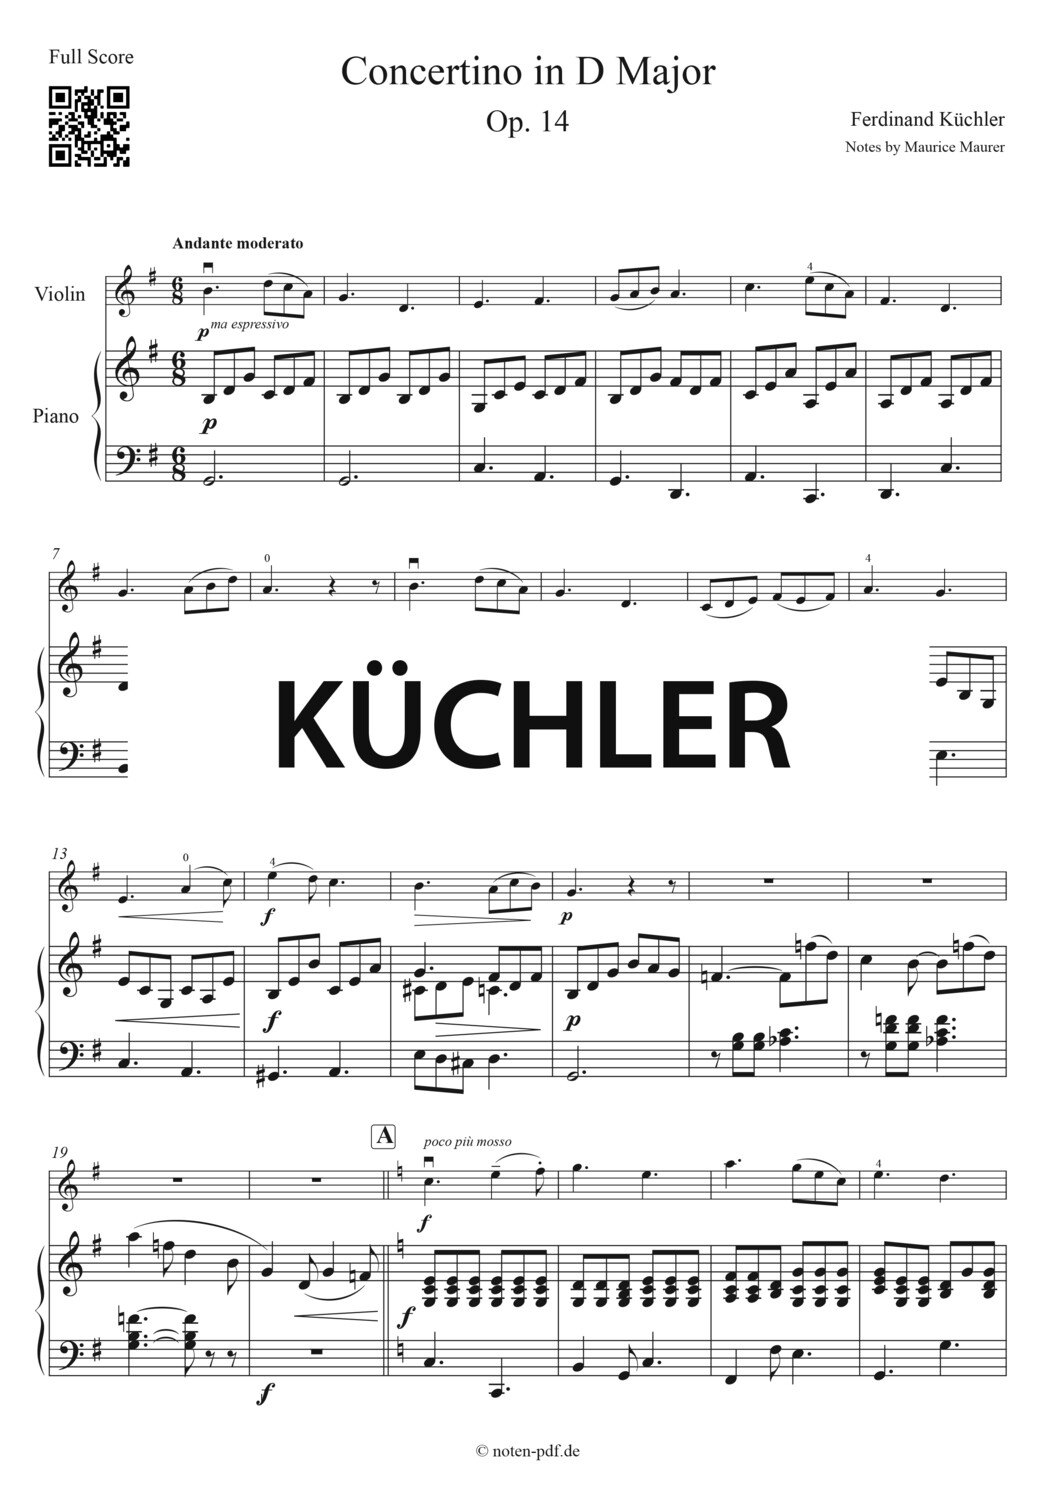 Küchler: Concertino Op. 14 - 2. Movement